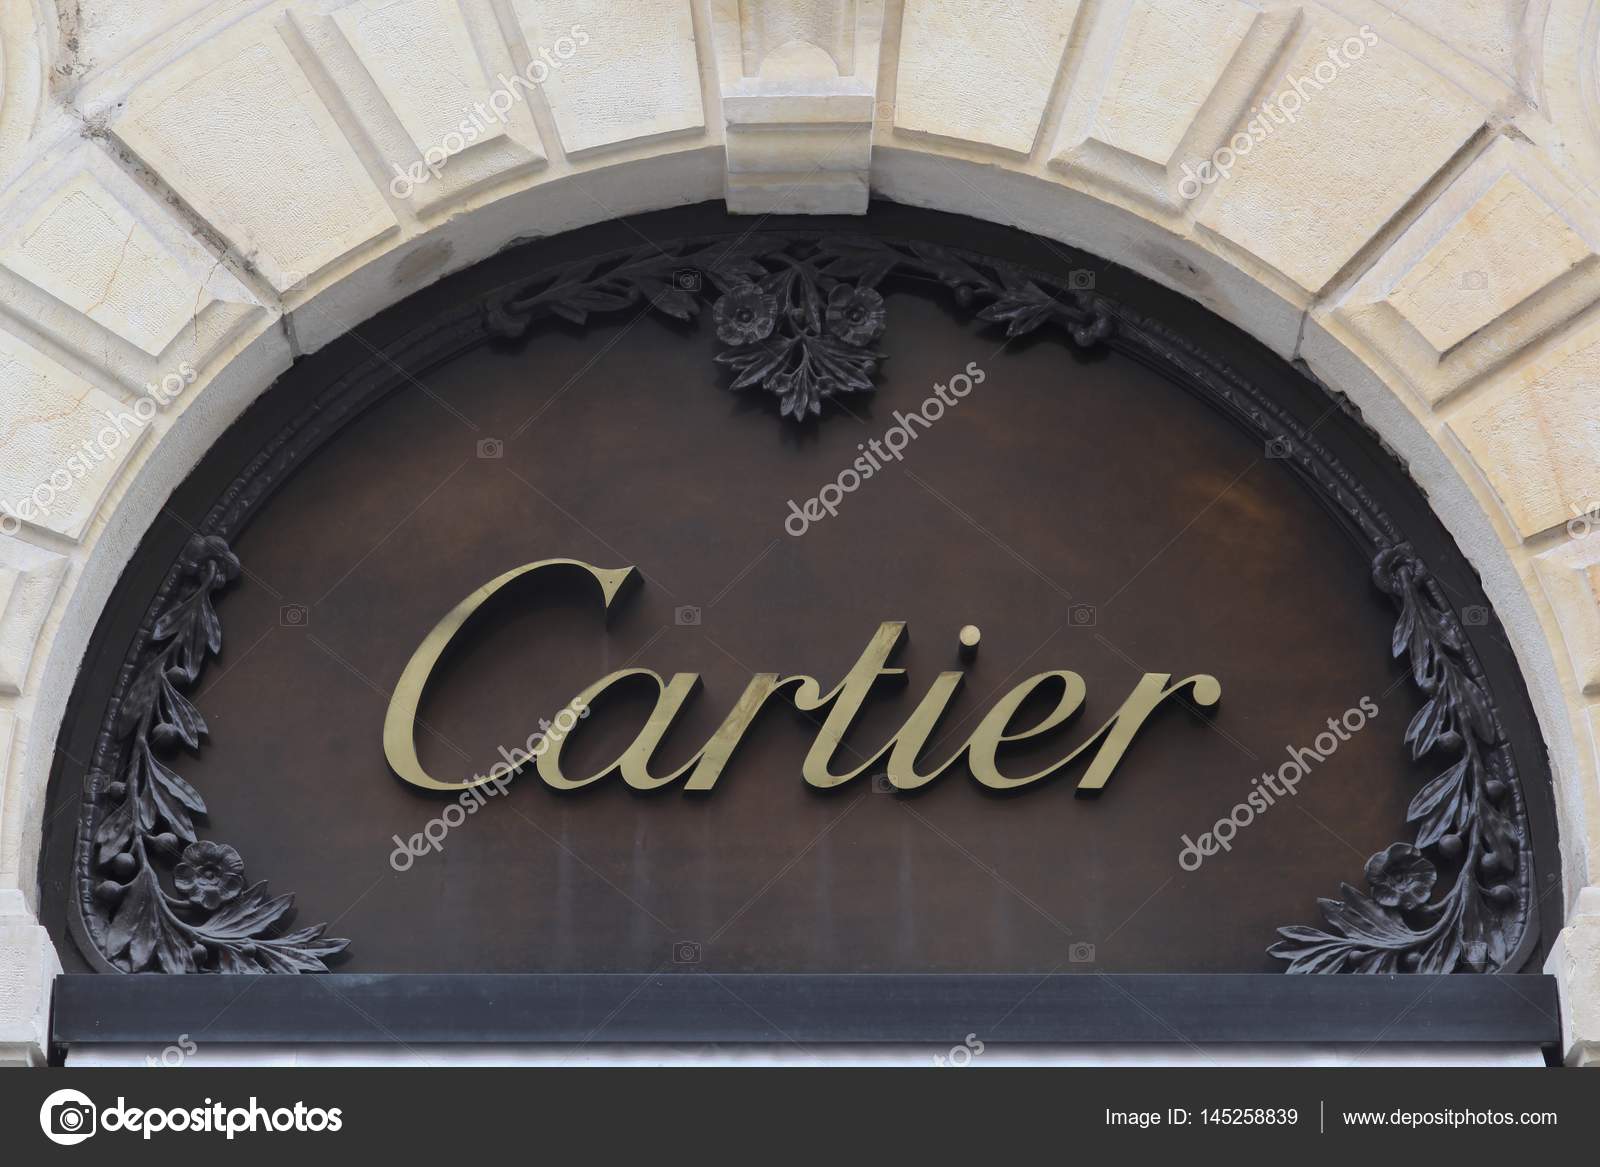 is cartier a french company